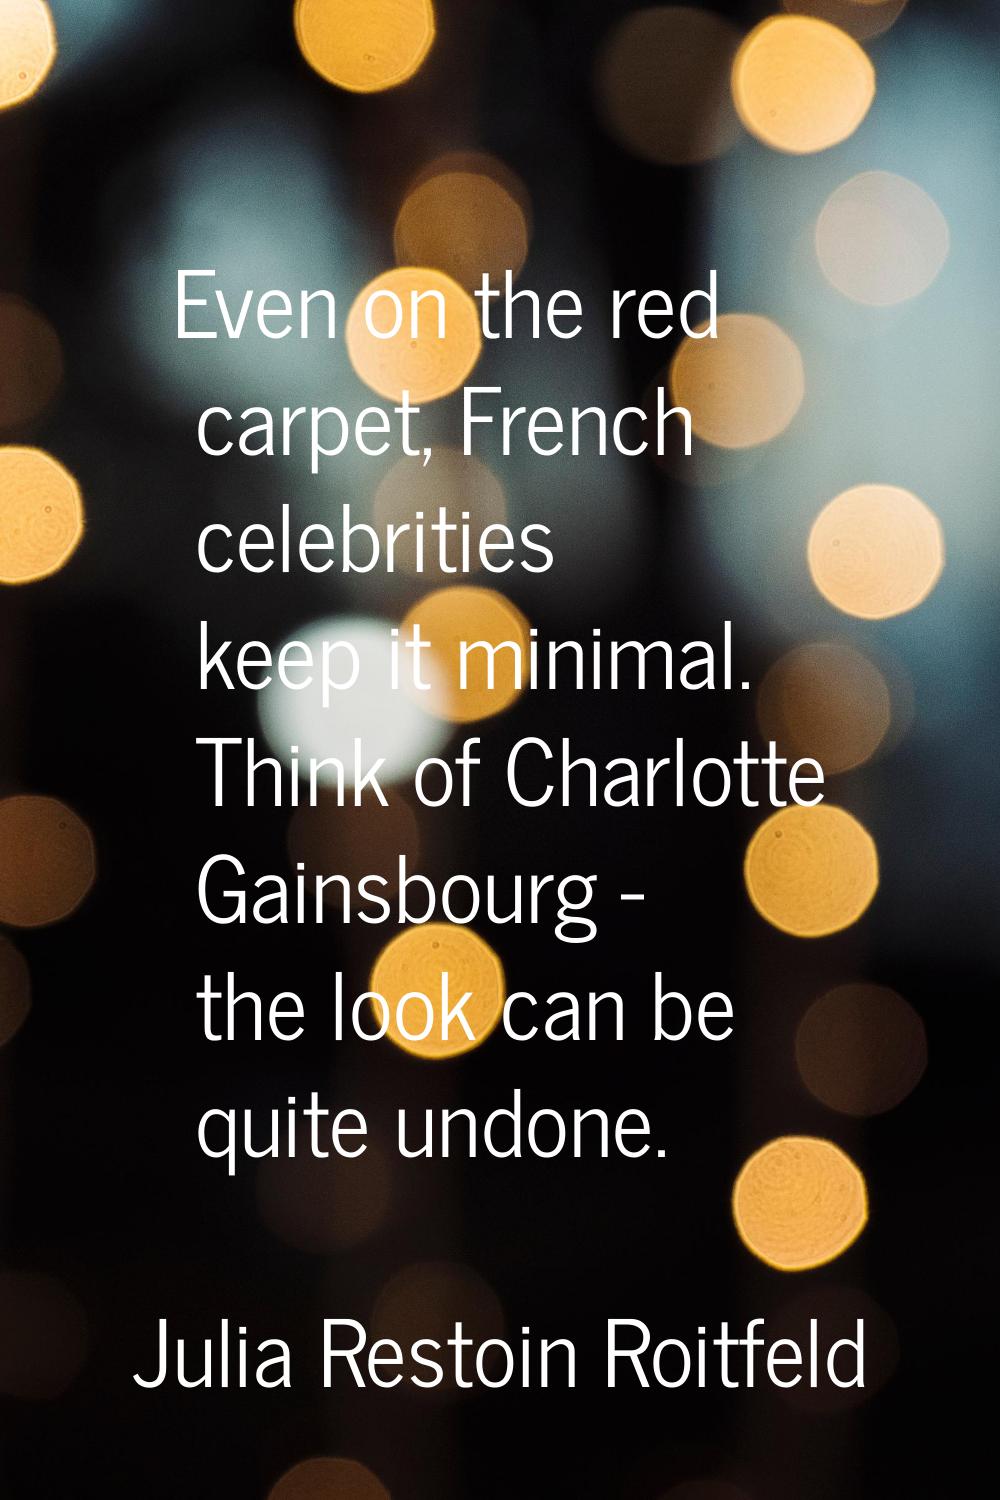 Even on the red carpet, French celebrities keep it minimal. Think of Charlotte Gainsbourg - the loo